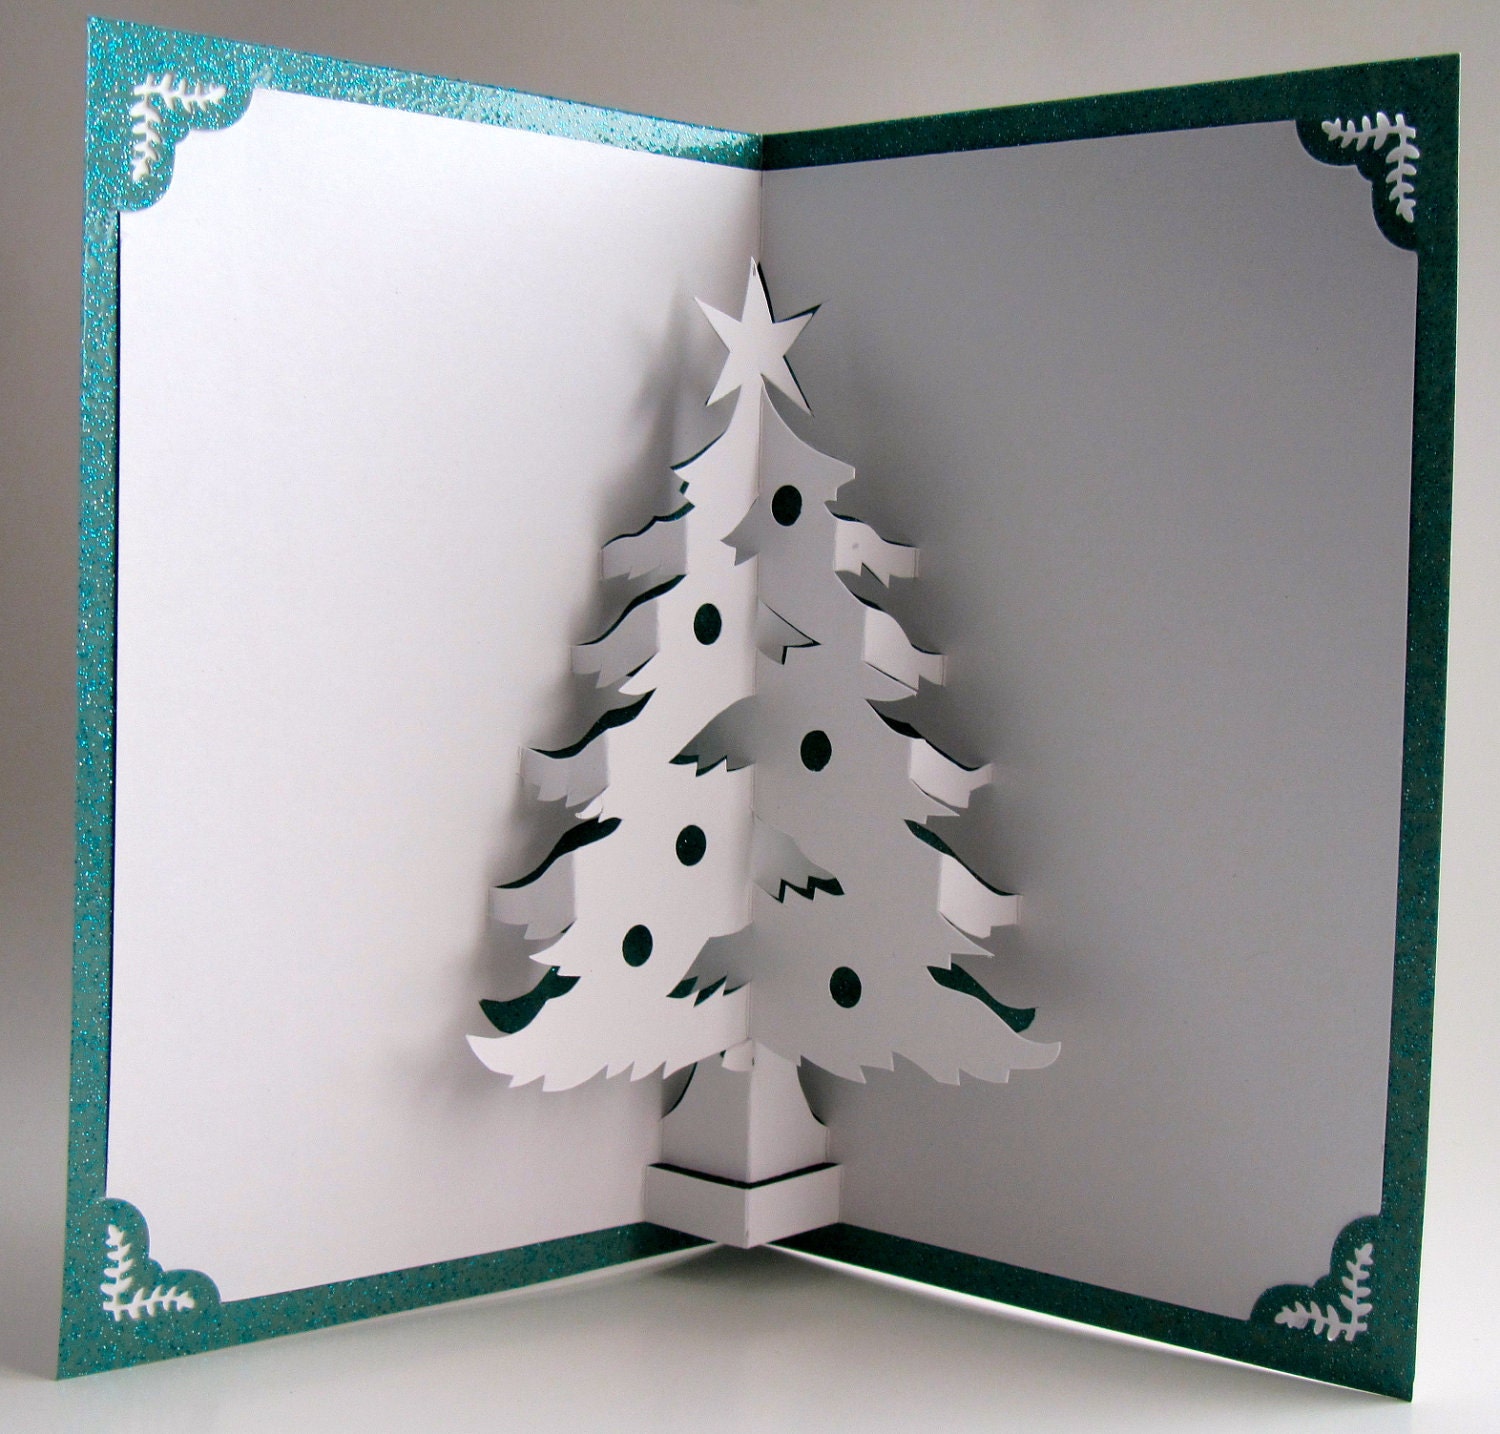 Christmas Tree Pop Up Home Décor 3D Handmade Cut by Hand Origamic Architecture in White and Shimmery Metallic Teal Green.